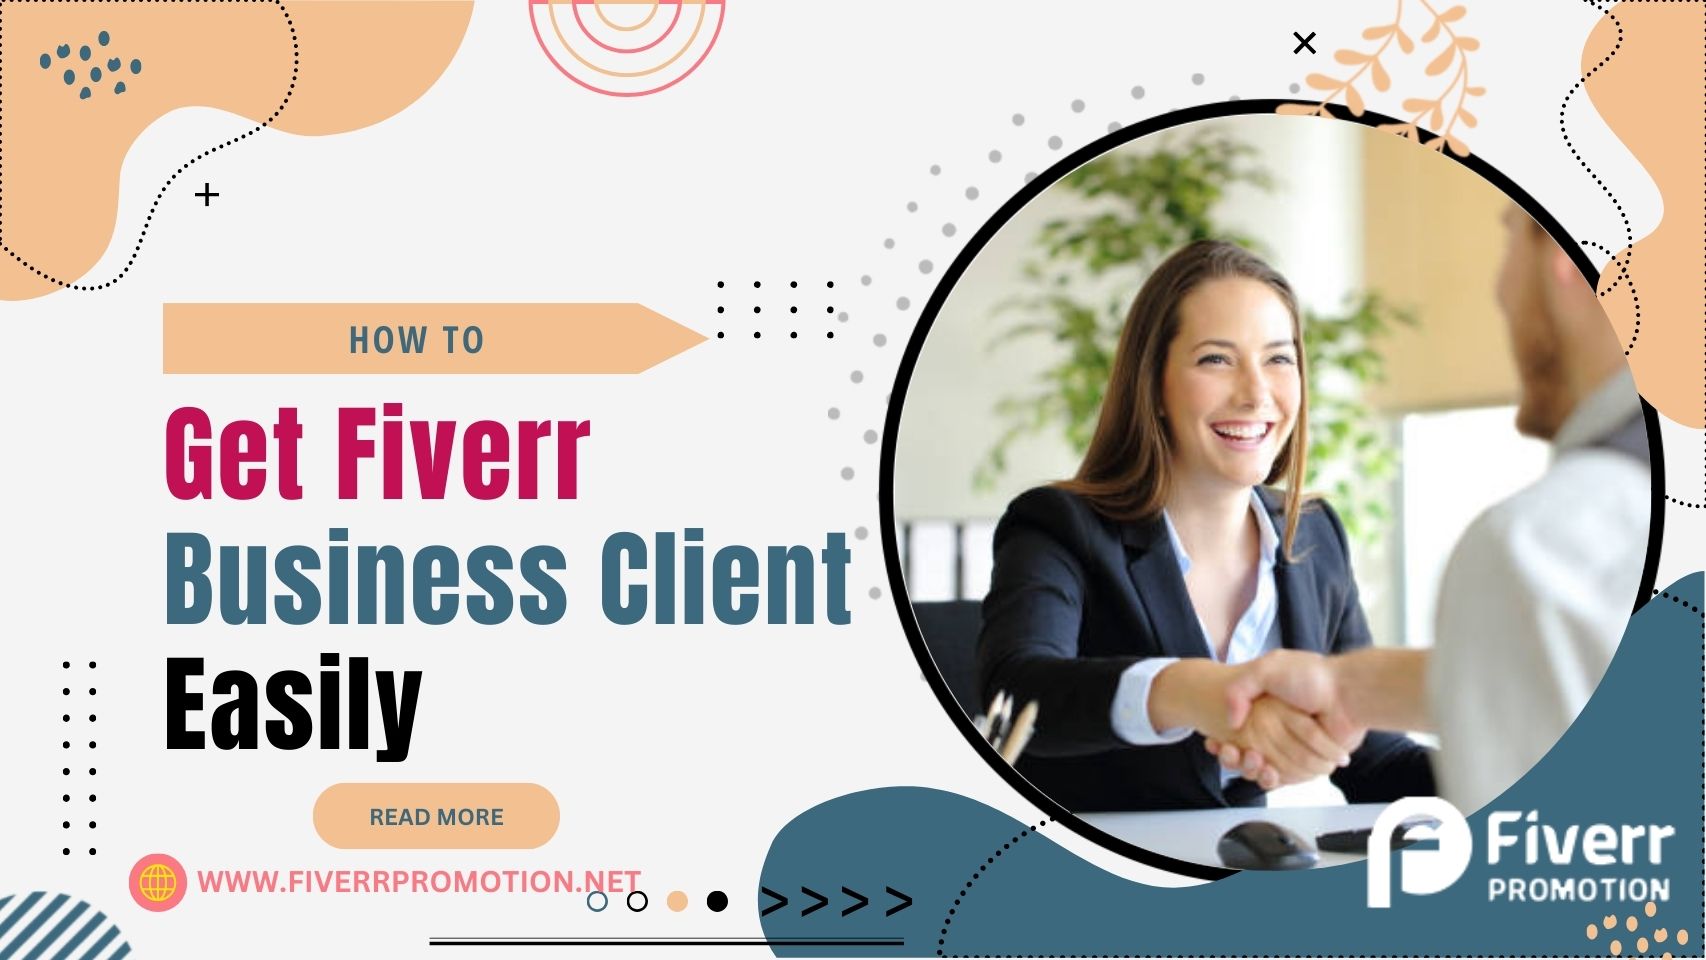 How to get fiverr business client easily